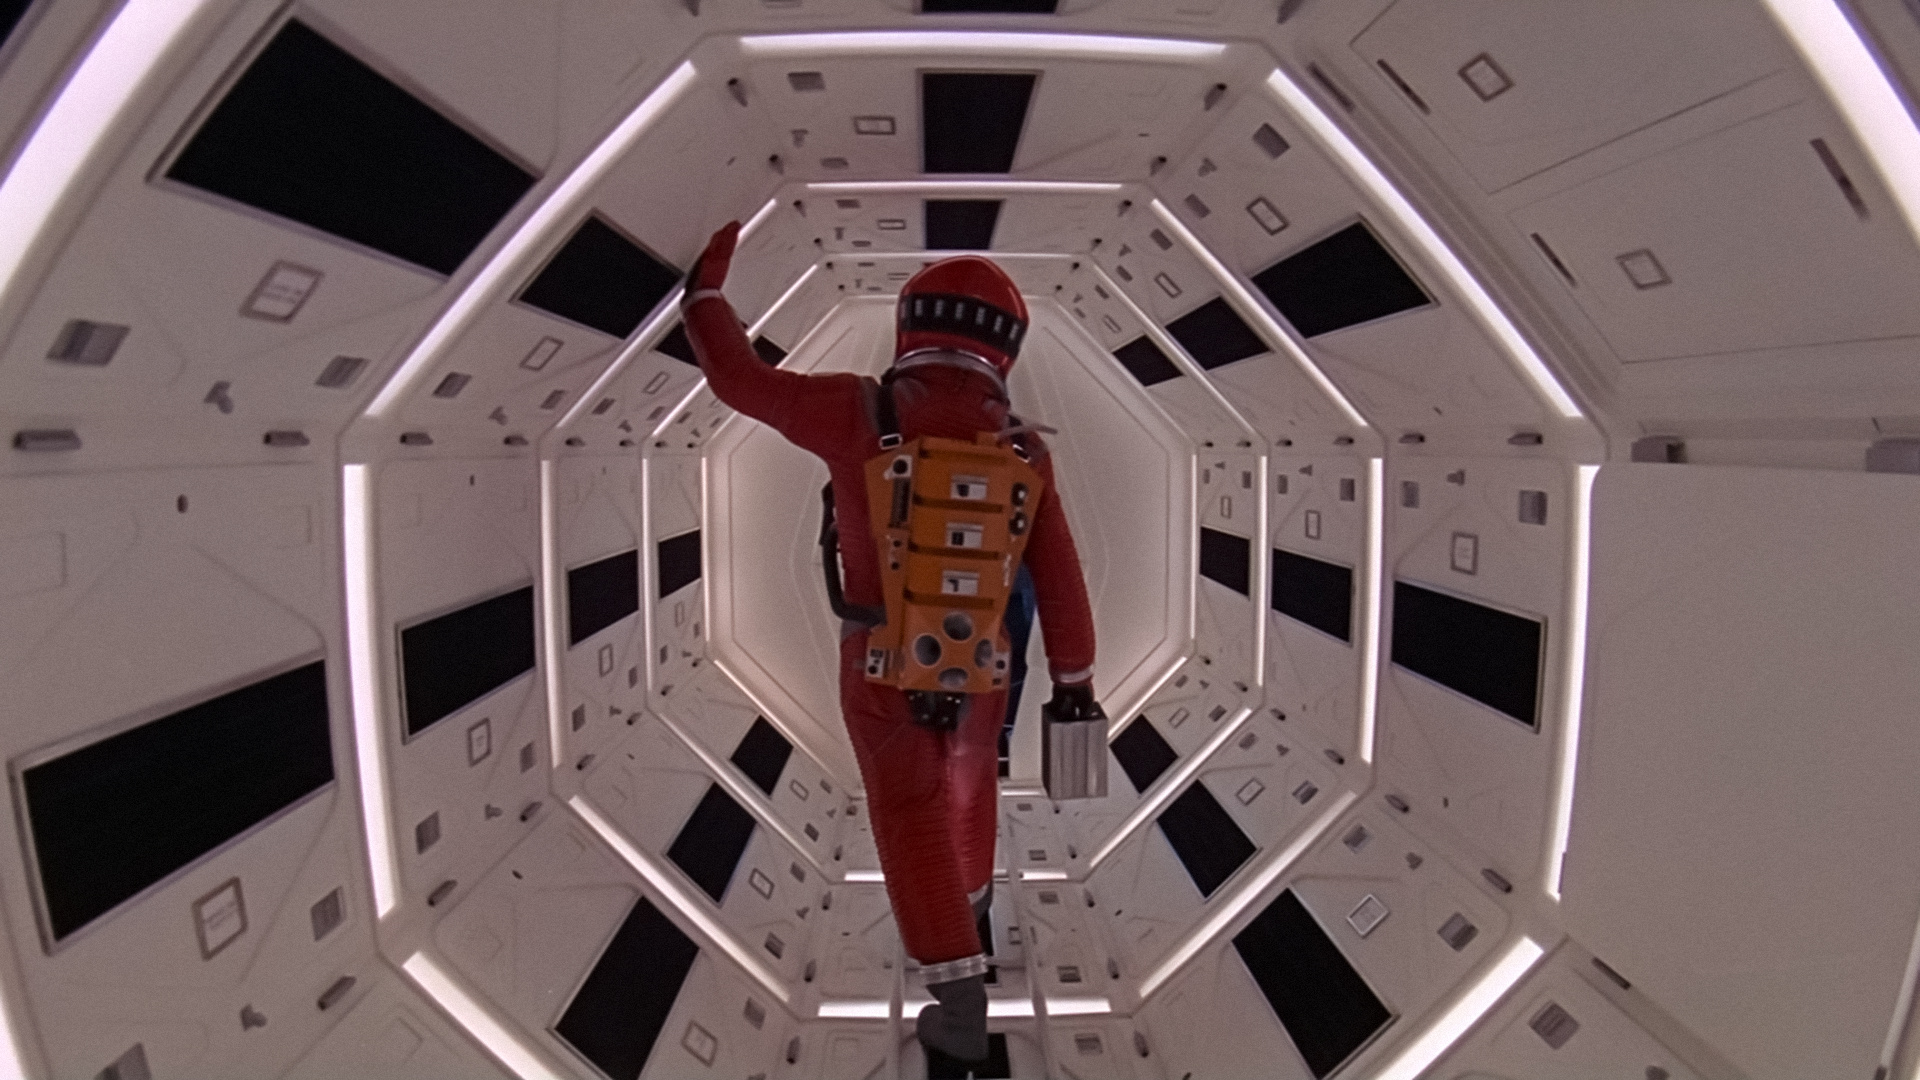 2001: A Space Odyssey Wallpapers - Top Free 2001: A Space Odyssey Backgrounds 1920x1080